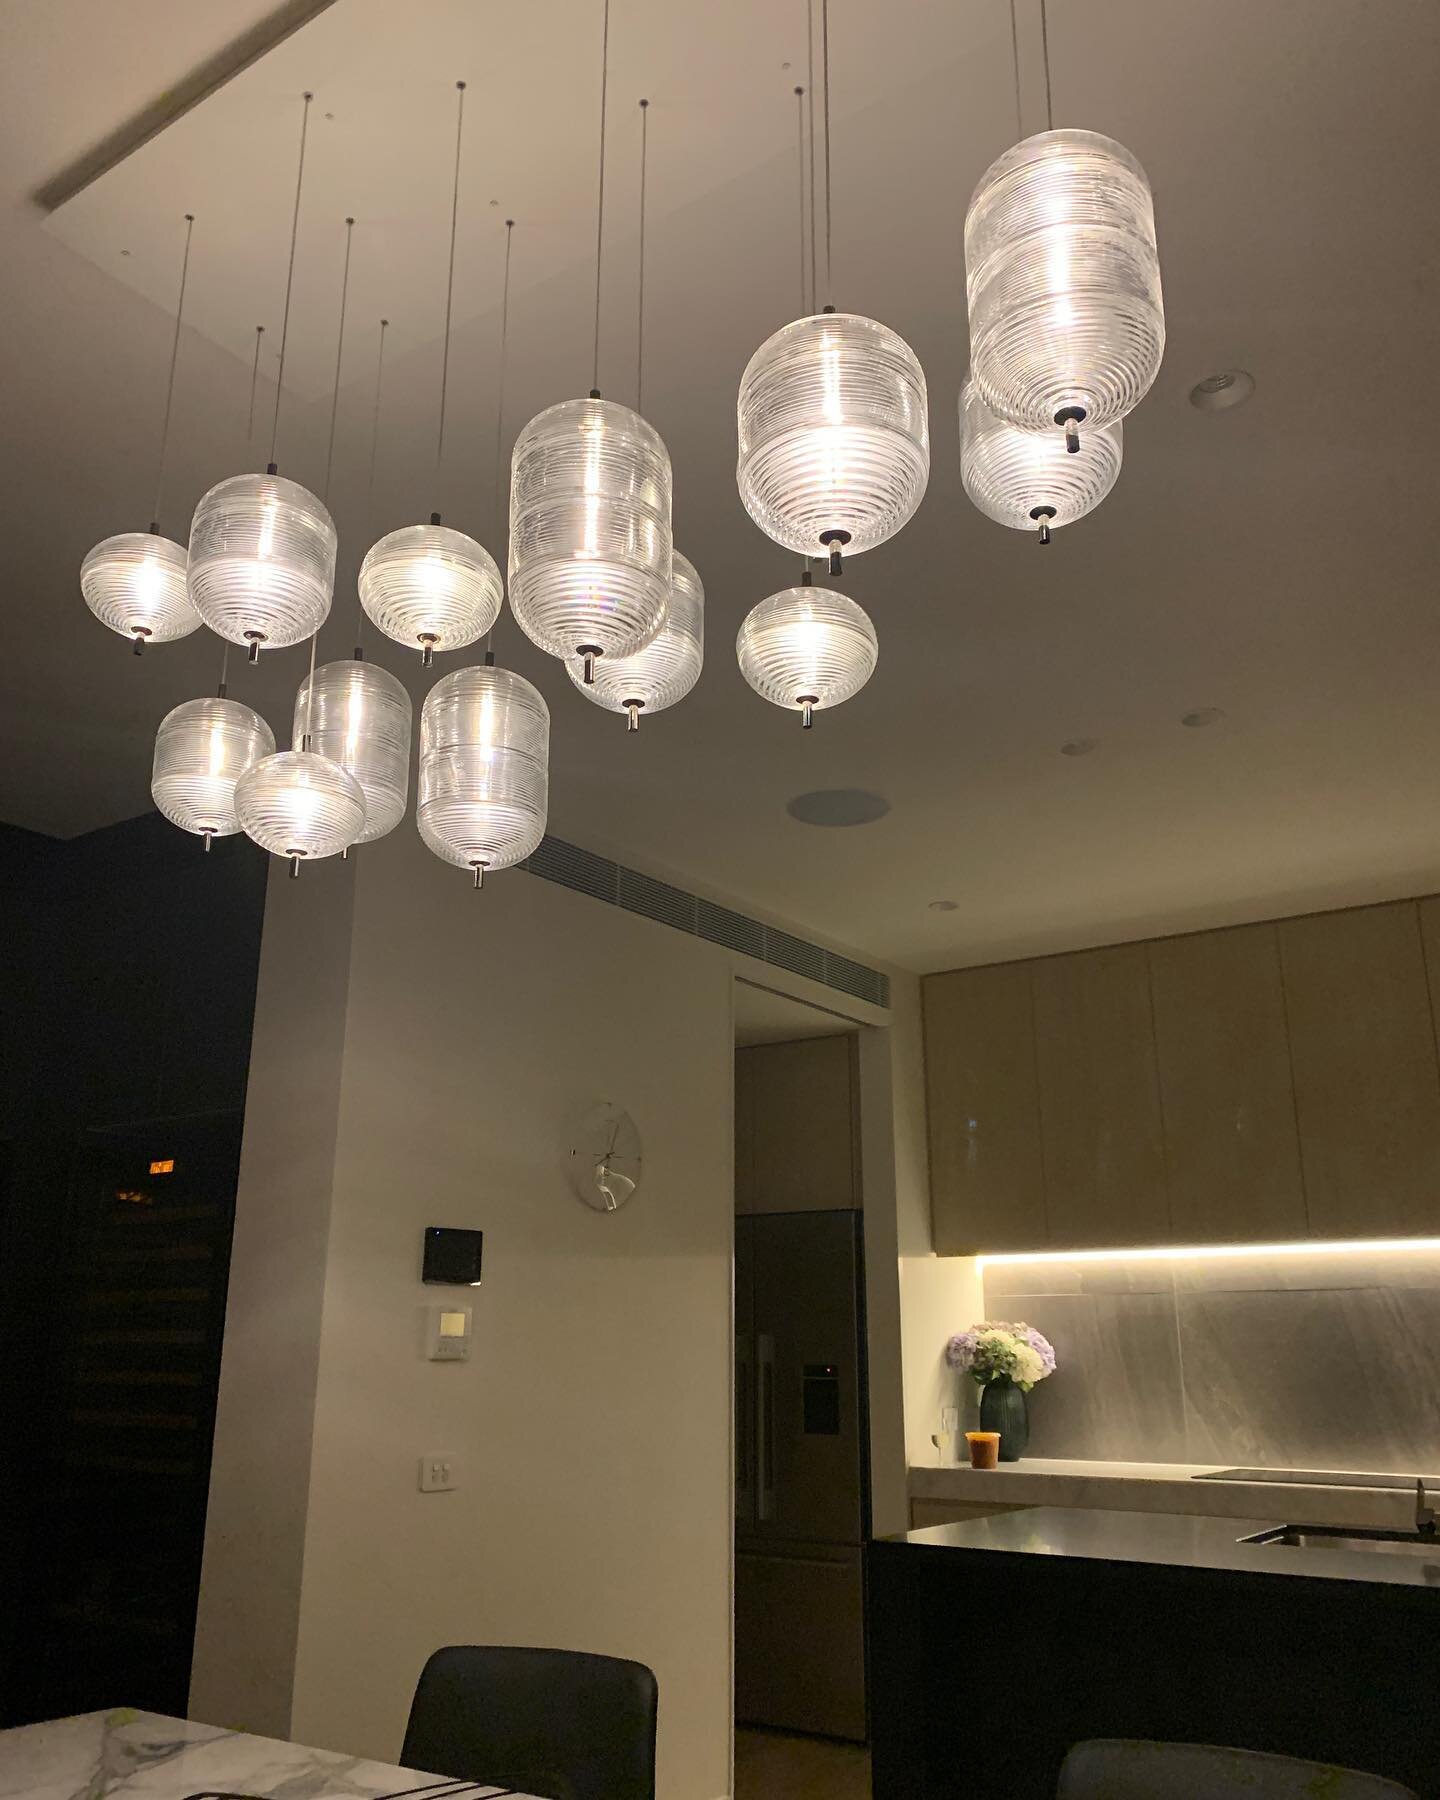 How you light your home can truely make a difference. Engage experts who use high quality products and you will be forever happy you made the investment.